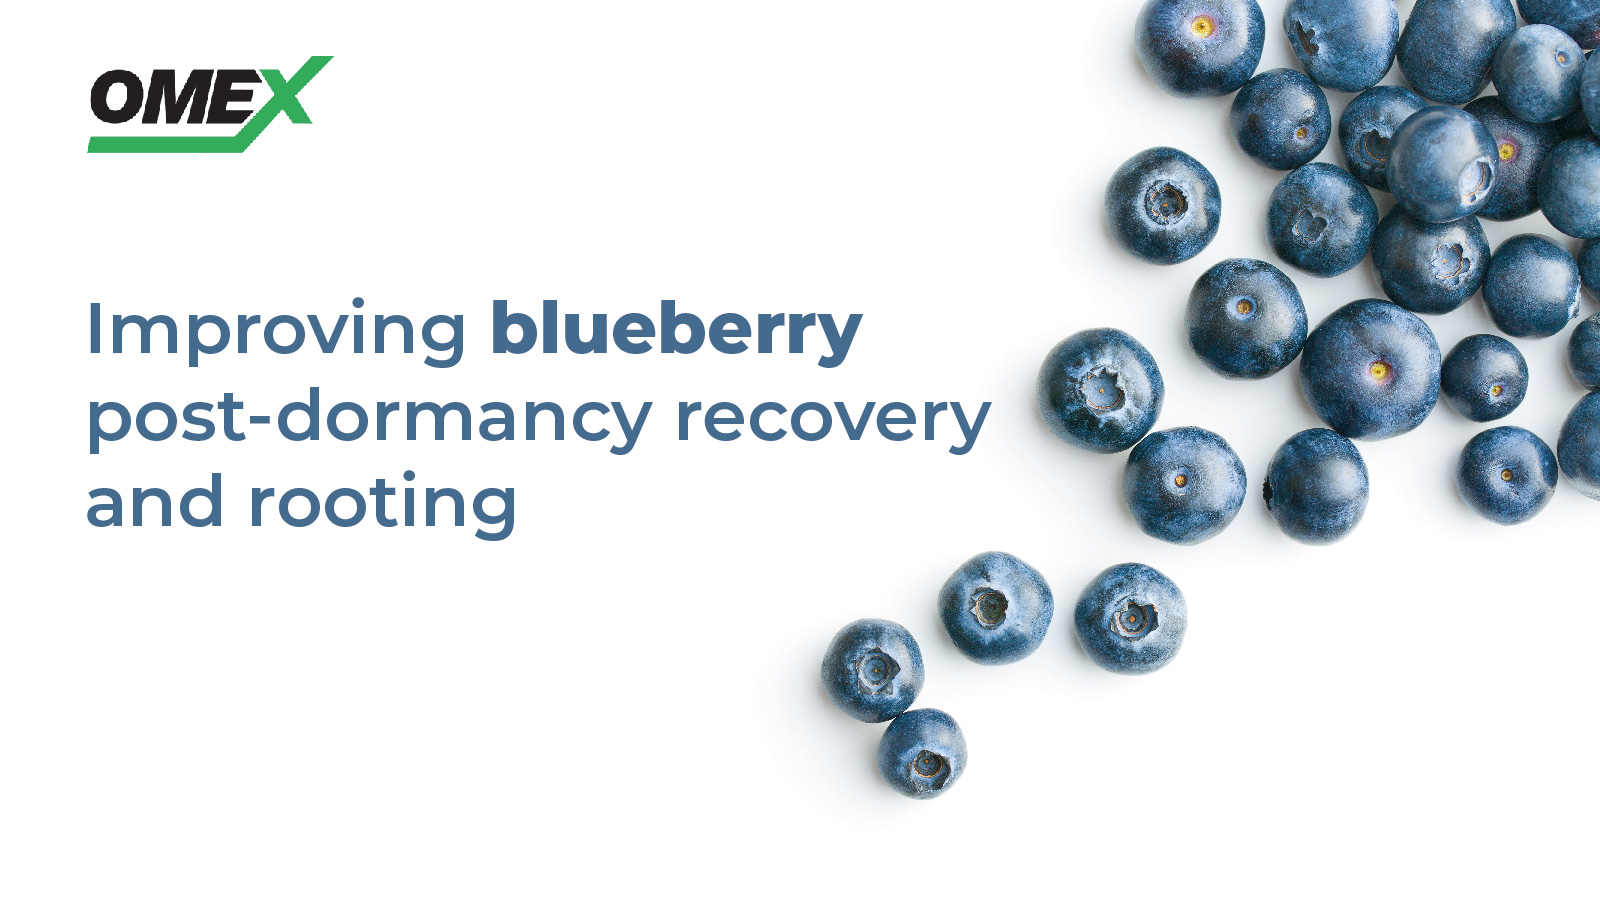 Improving blueberry post-dormancy recovery and rooting